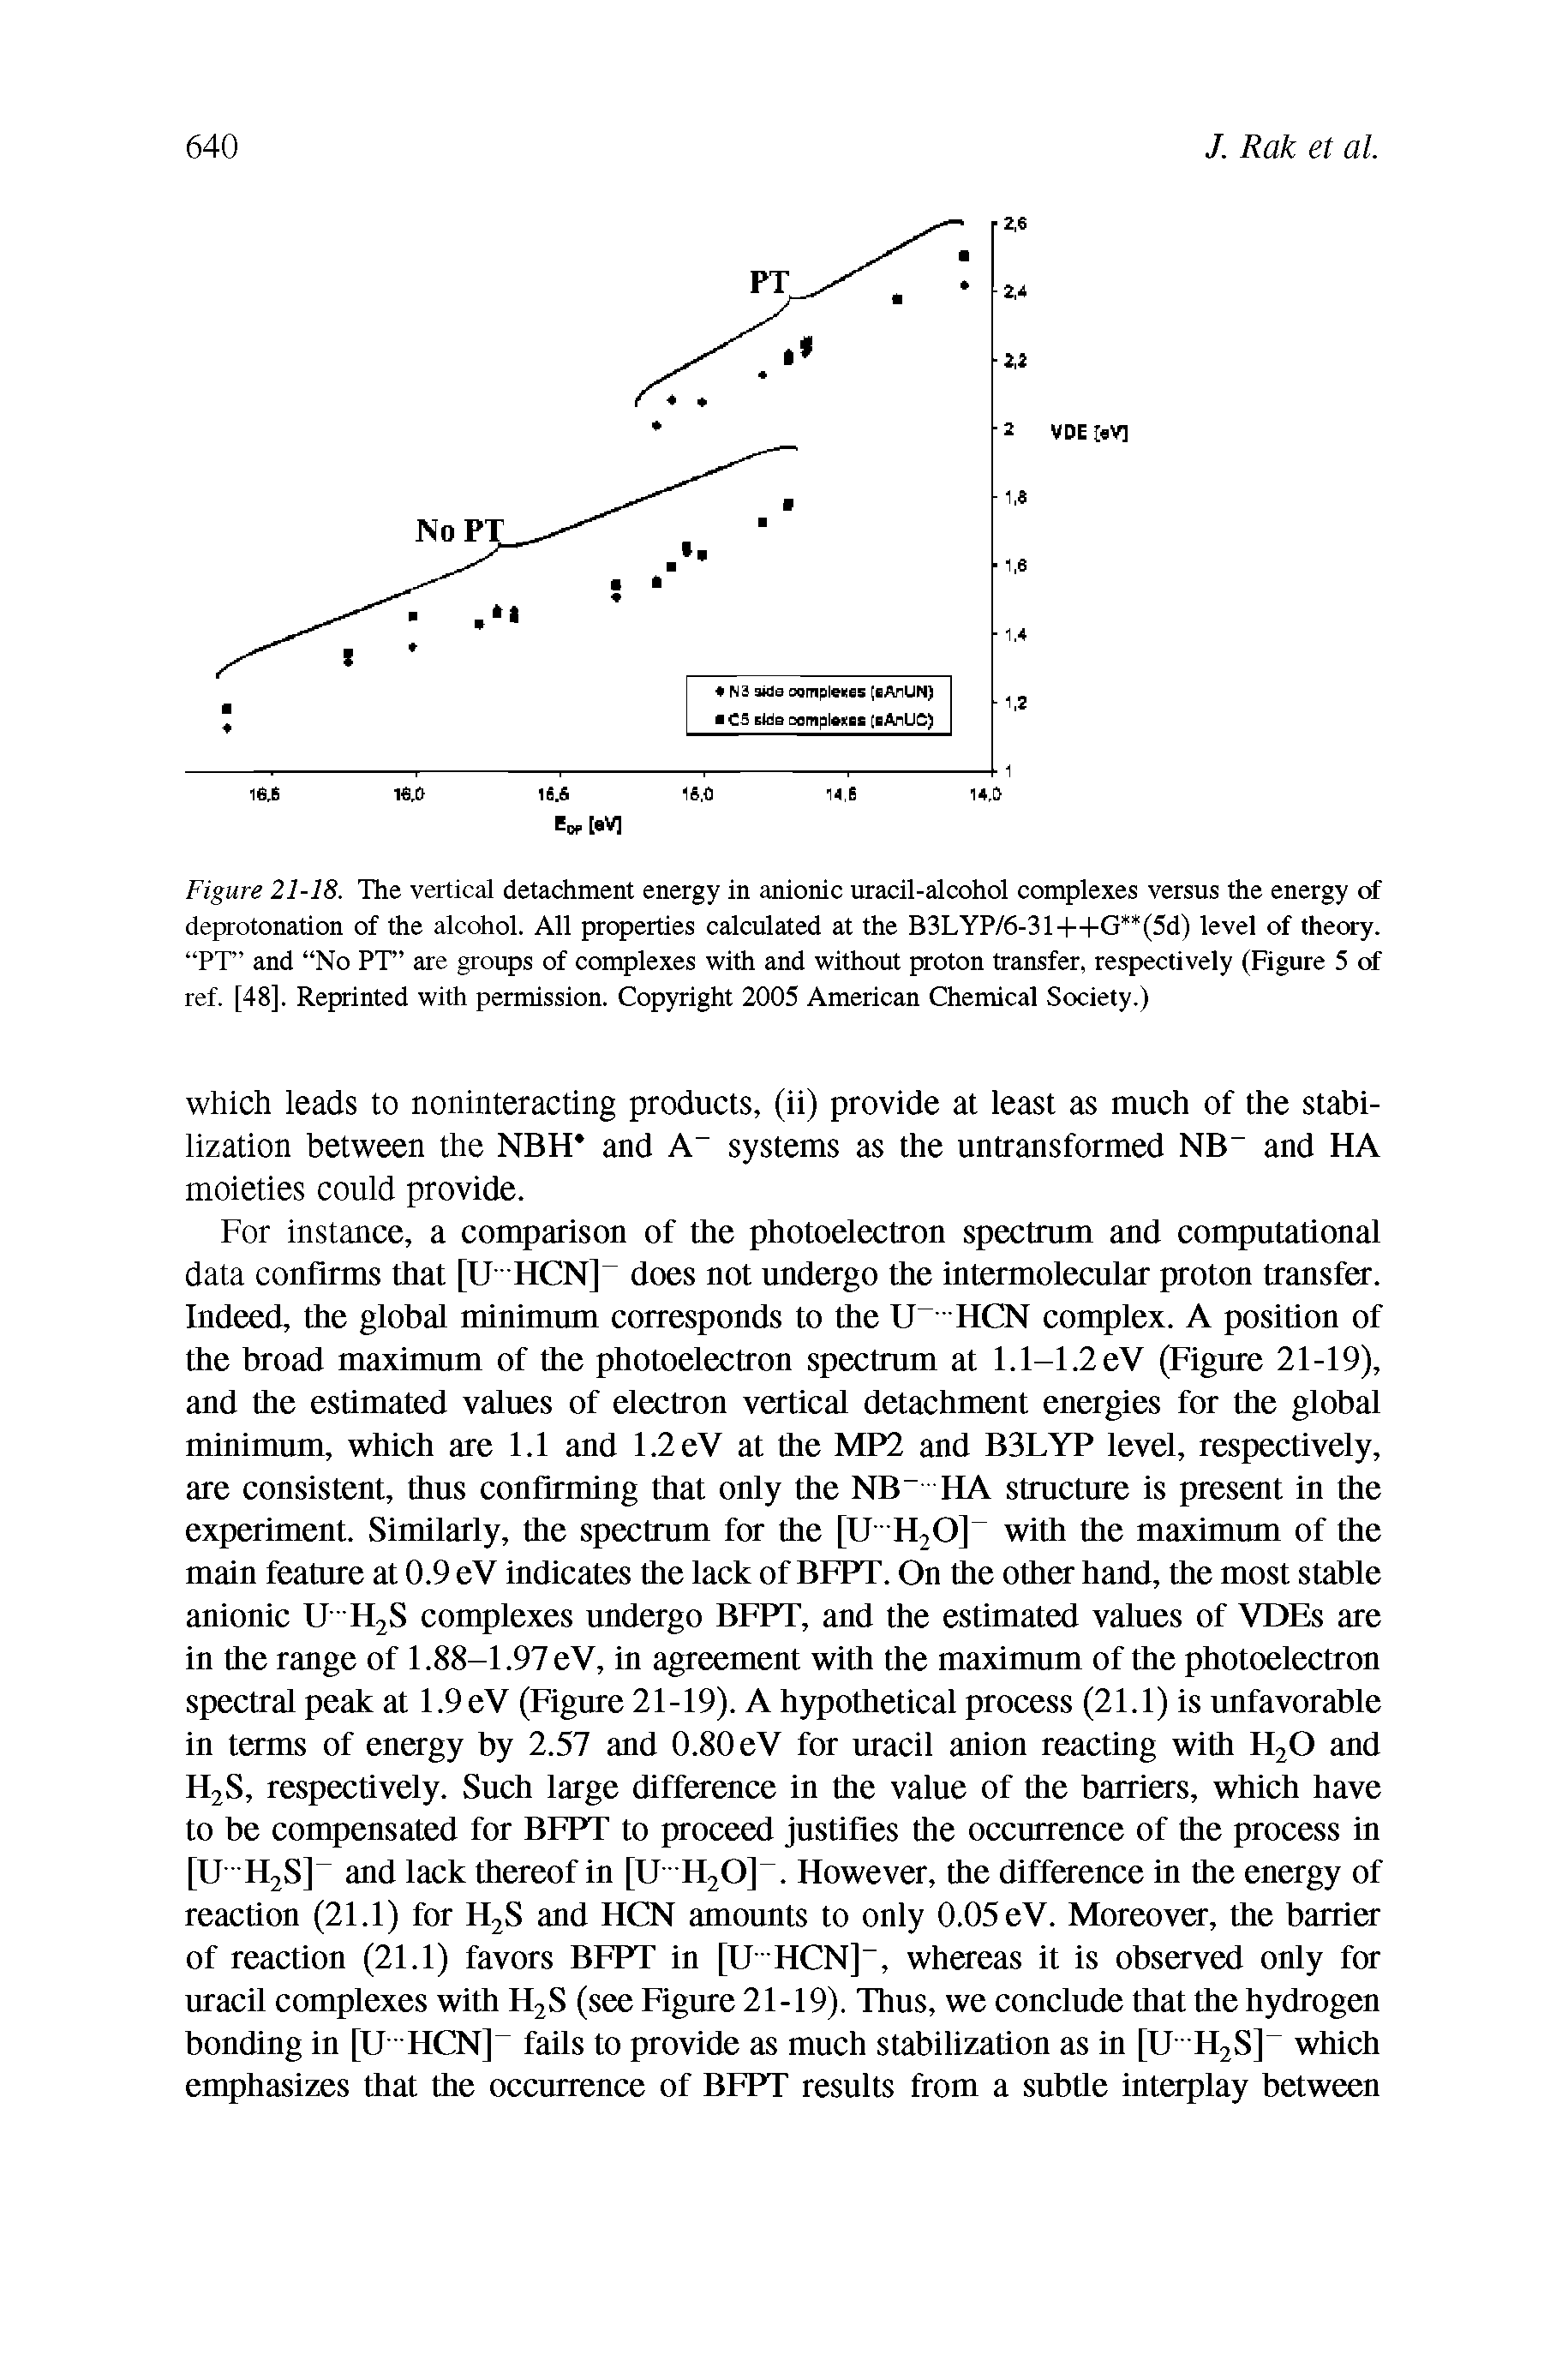 Figure 21-18. The vertical detachment energy in anionic uracil-alcohol complexes versus the energy of deprotonation of the alcohol. All properties calculated at the B3LYP/6-31+- -G (5d) level of theory. PT and No PT are groups of complexes with and without proton transfer, respectively (Figure 5 of ref. [48]. Reprinted with permission. Copyright 2005 American Chemical Society.)...